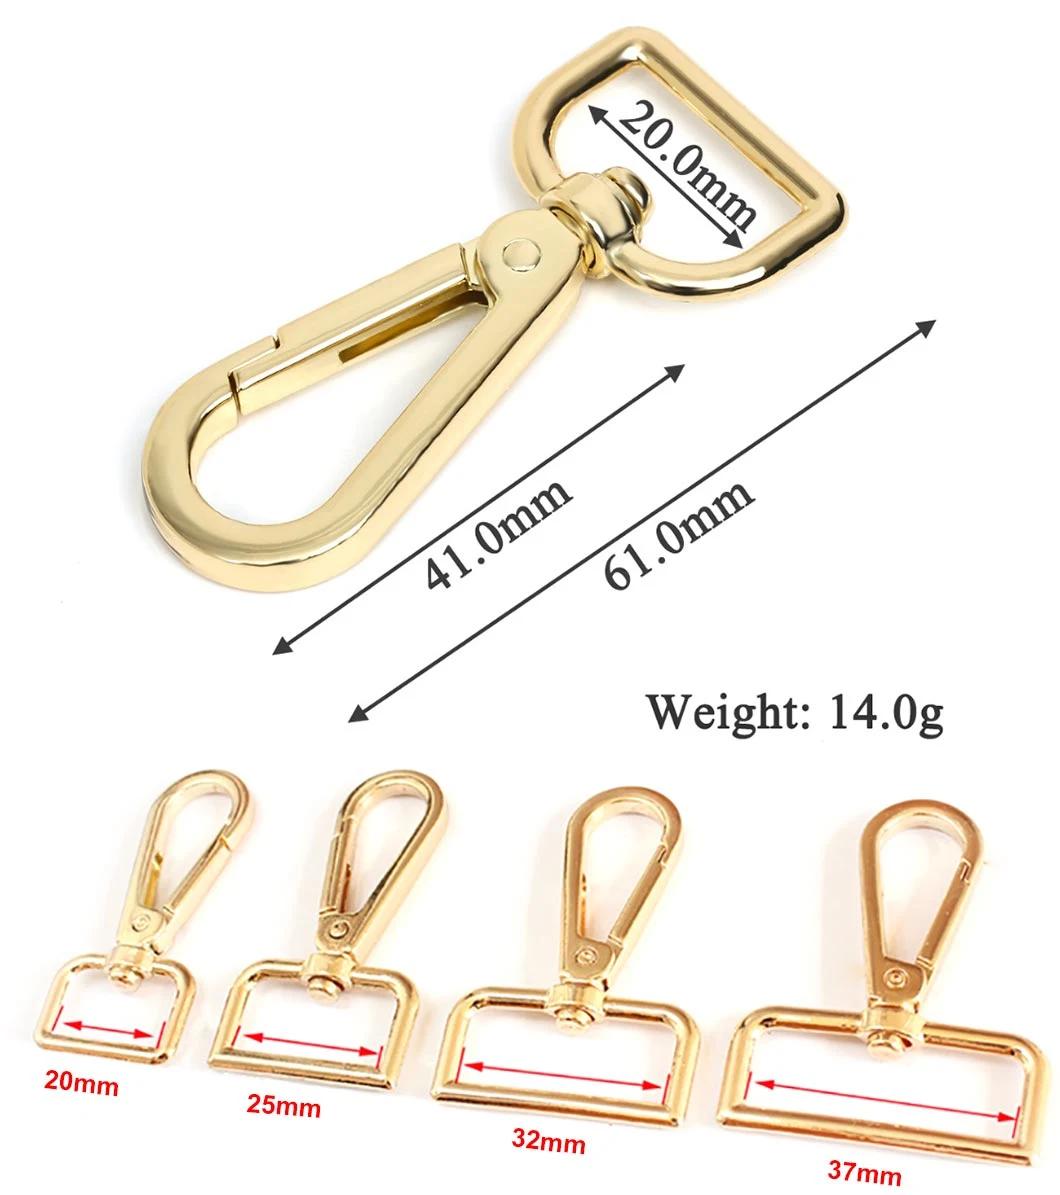 Nickle Plated Metal Lobster Claw Swivel Snap Clasp Hook for Key Ring and Craft Findings